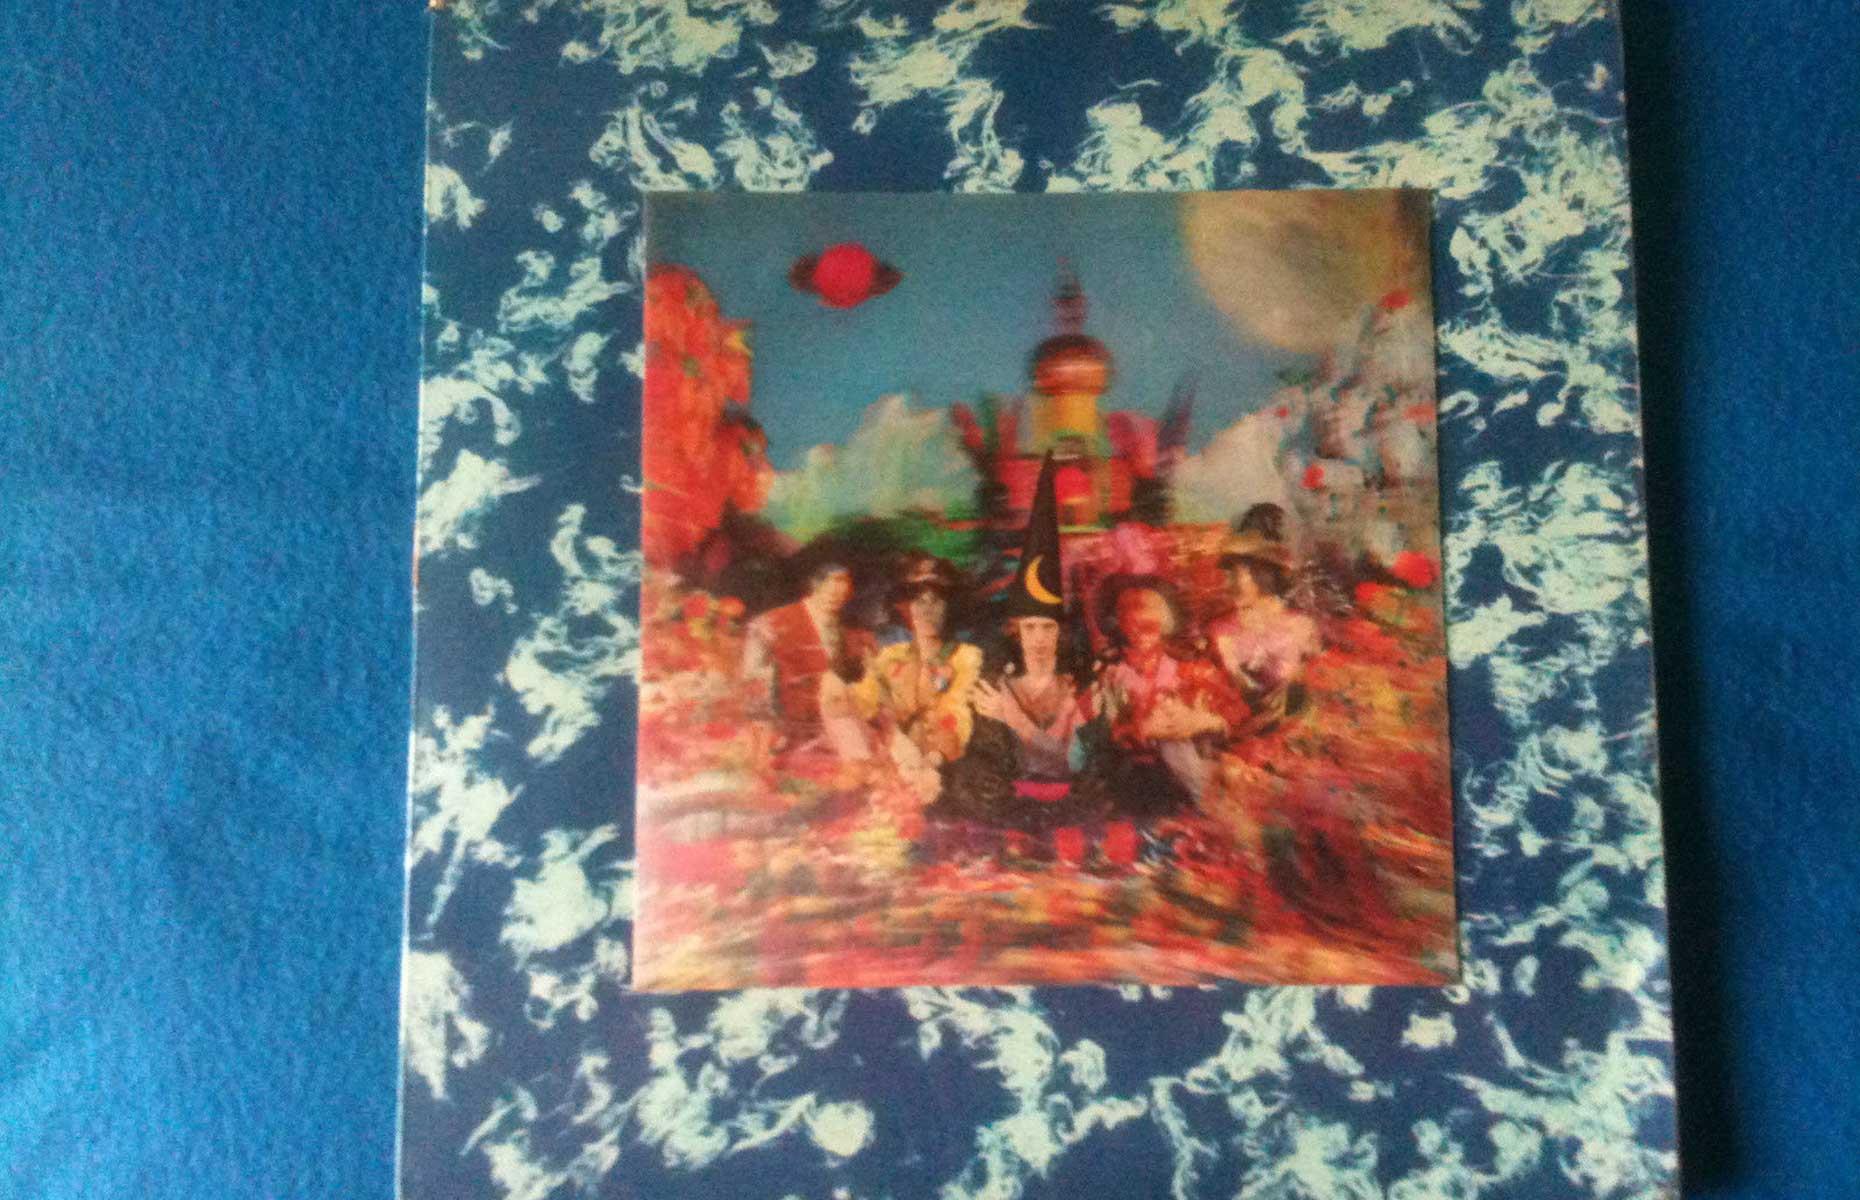 The Rolling Stones – Their Satanic Majesties Request